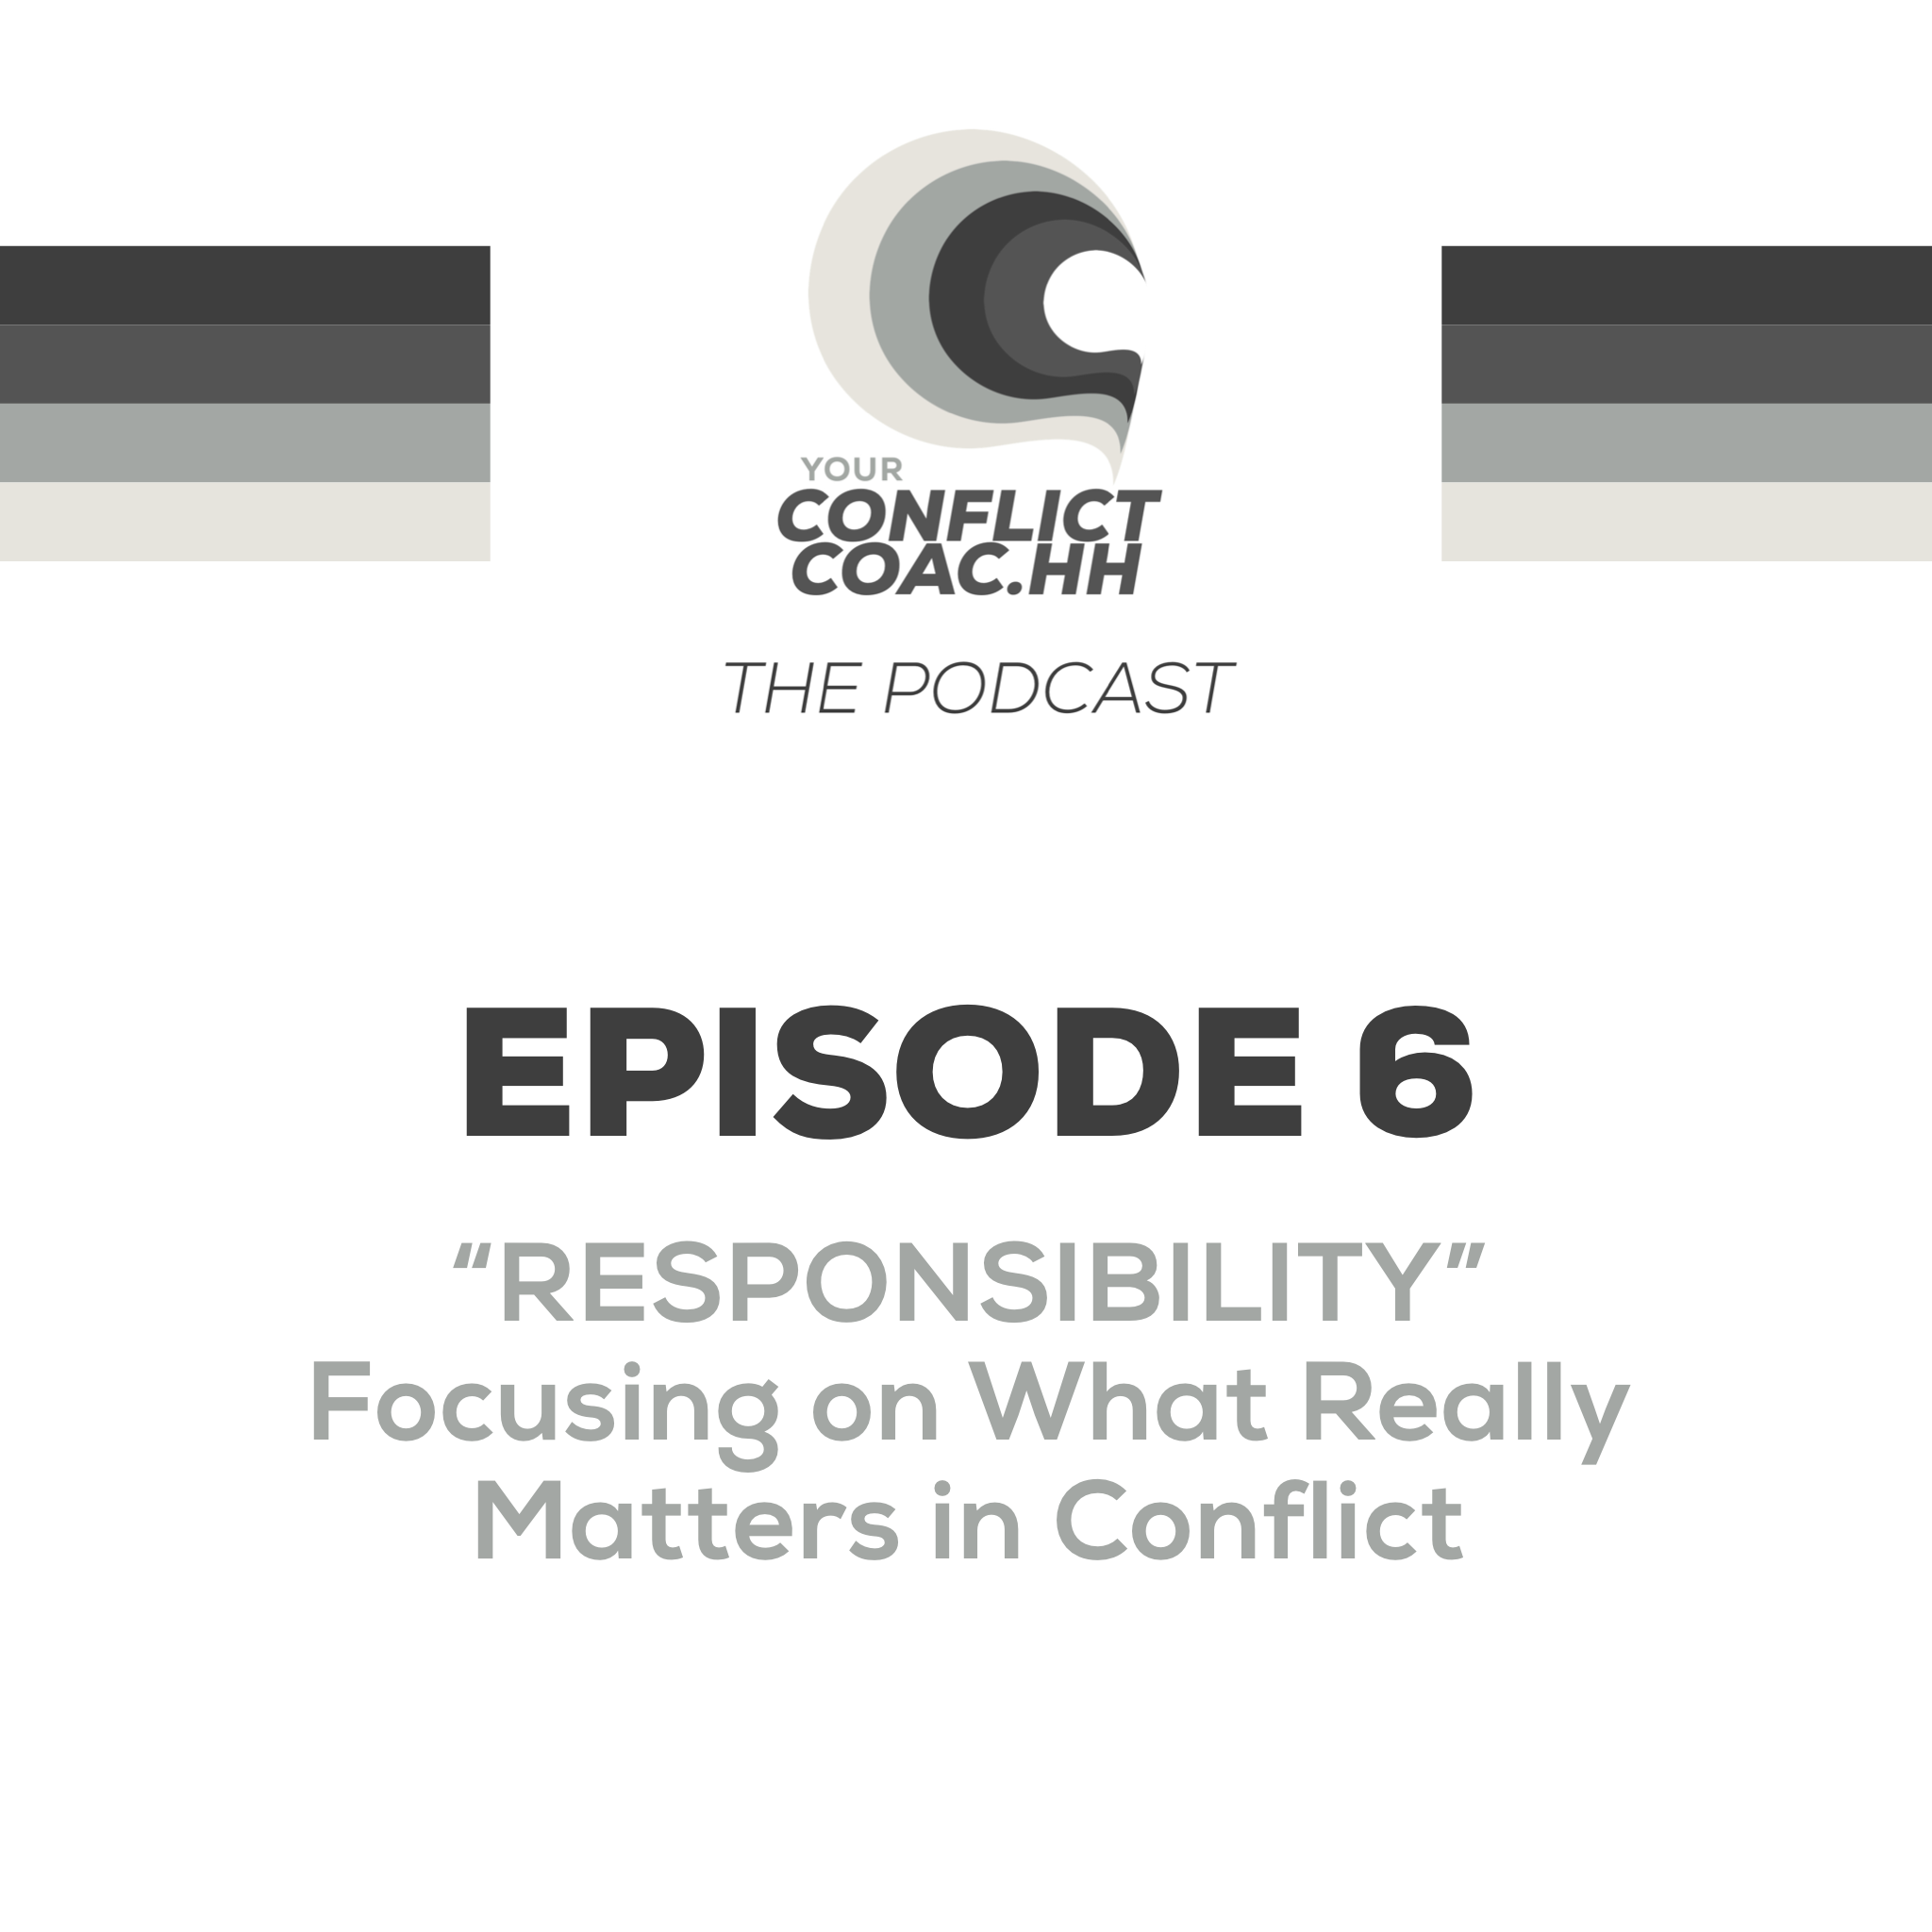 RESPONSIBILITY - Focusing on What Really Matters in Conflict